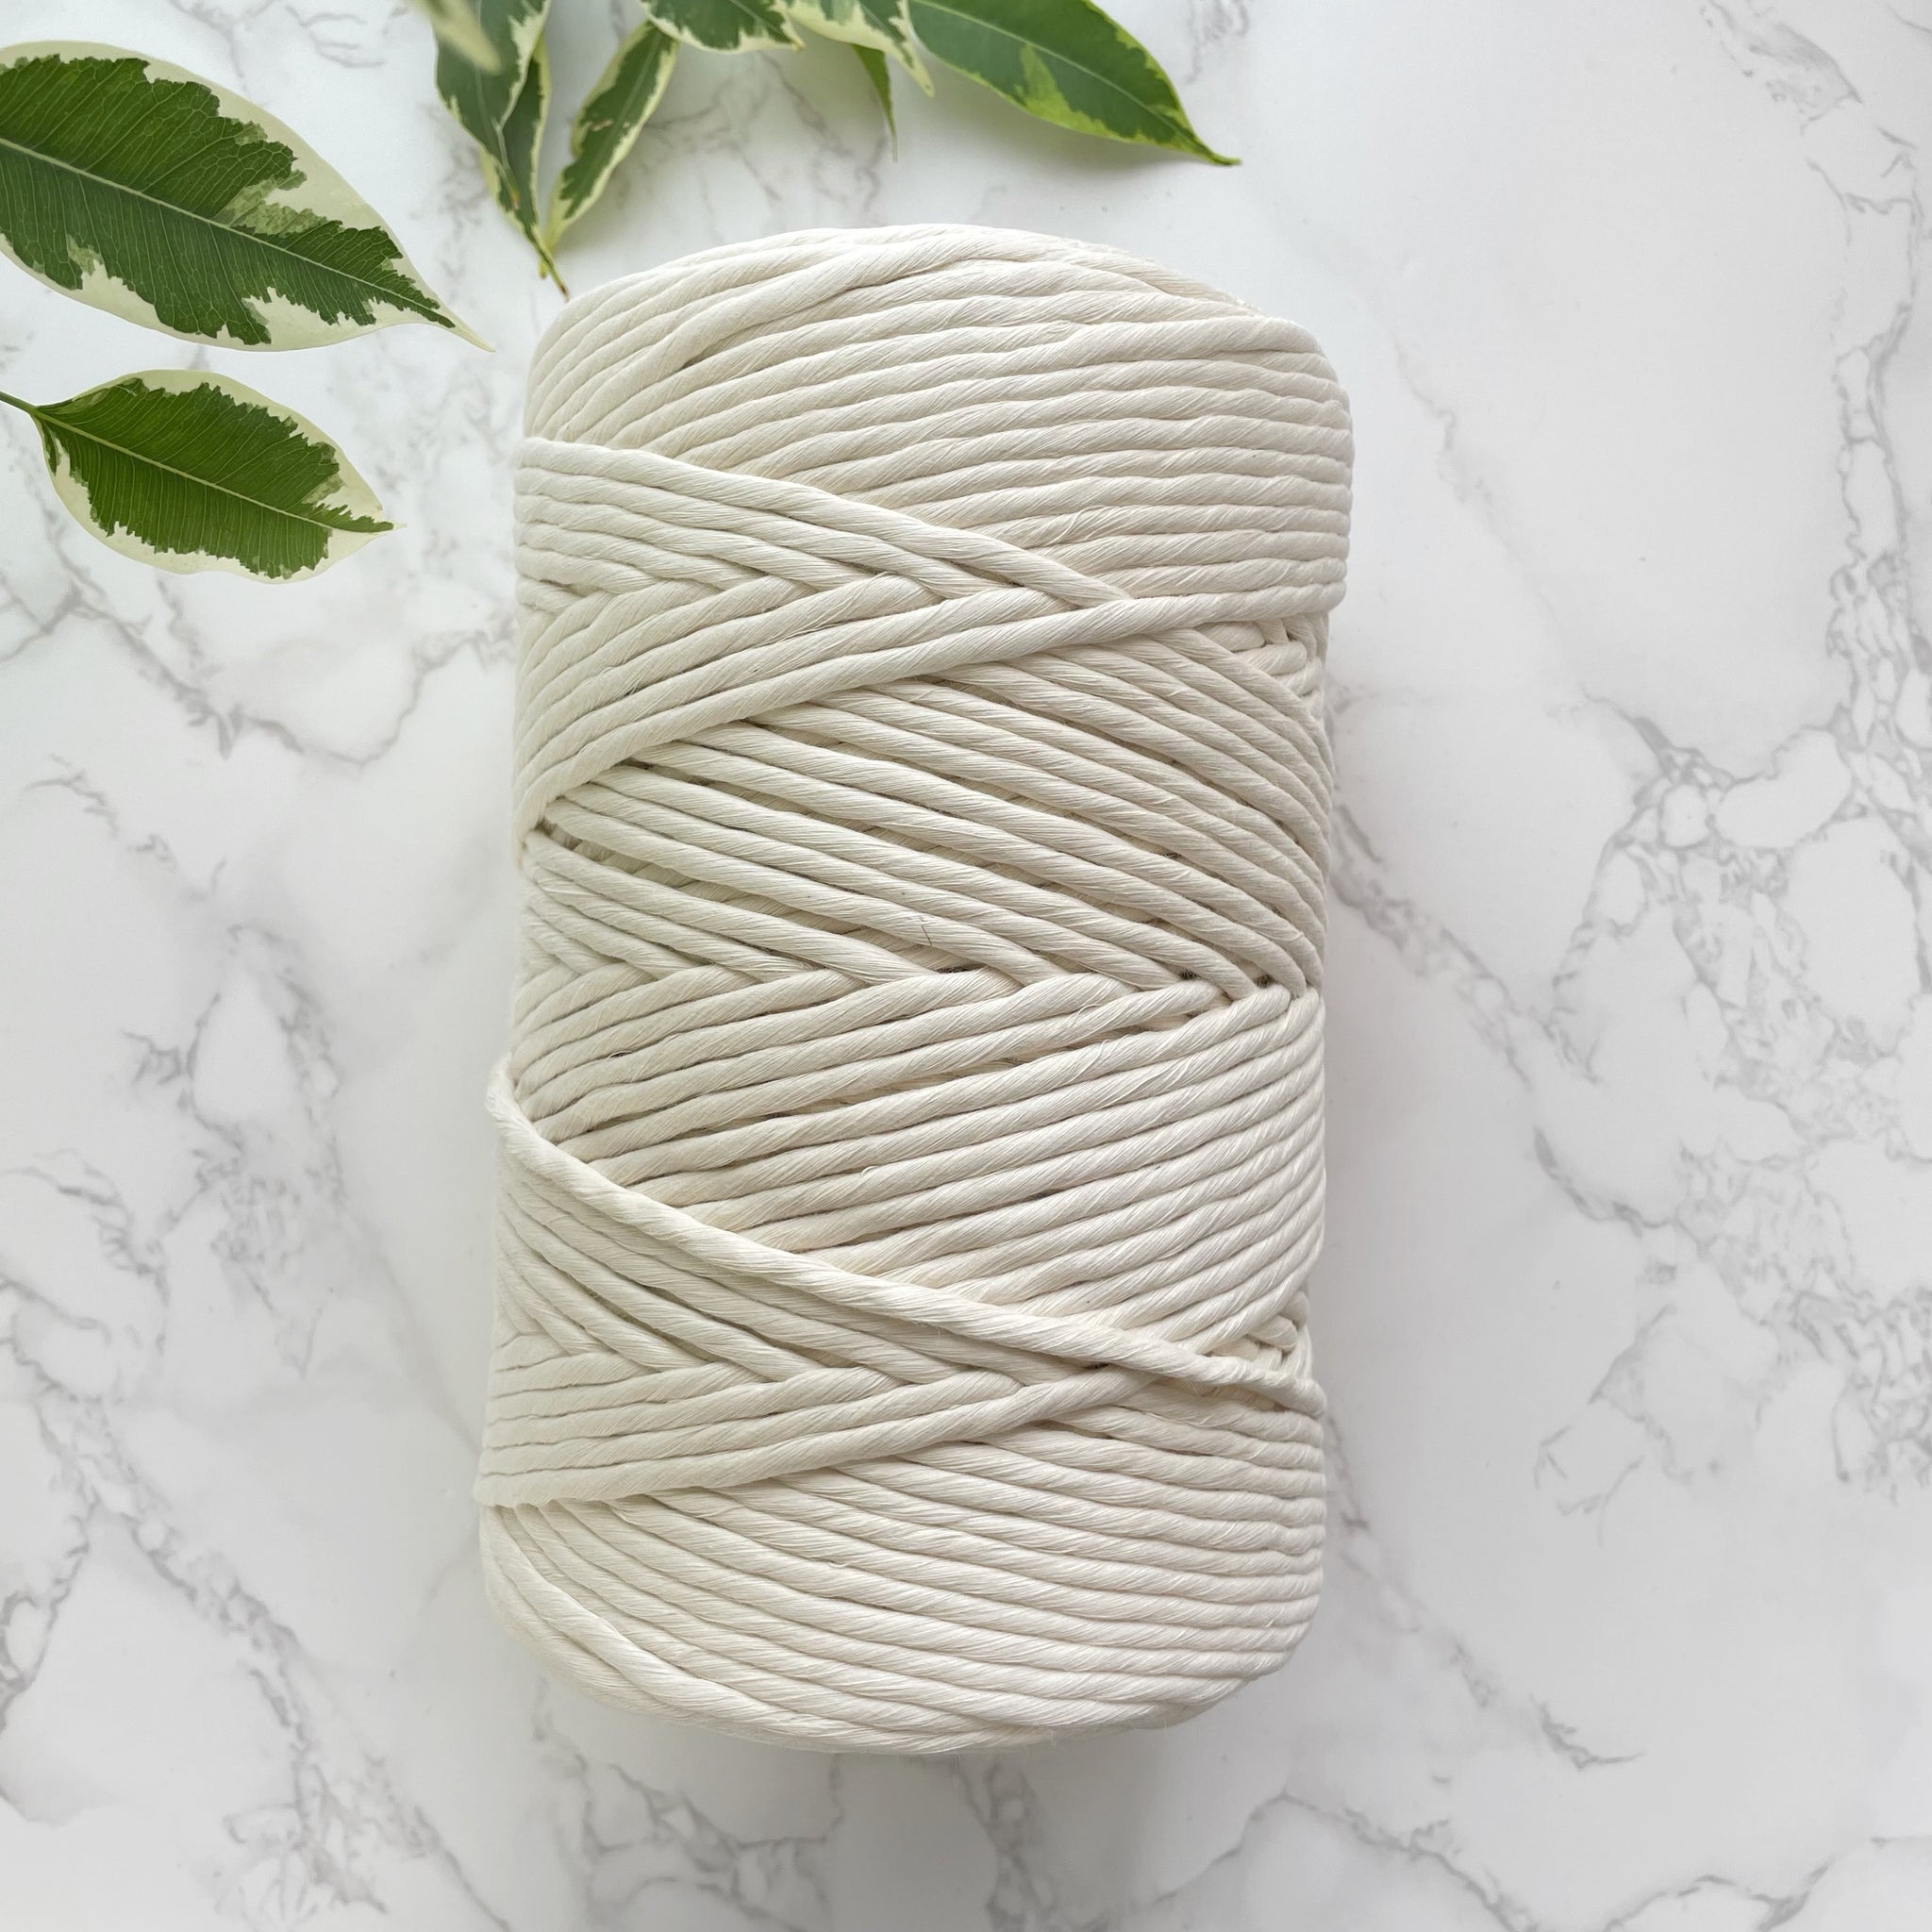 5mm Cotton String - Natural/Undyed – The Ivy Studio